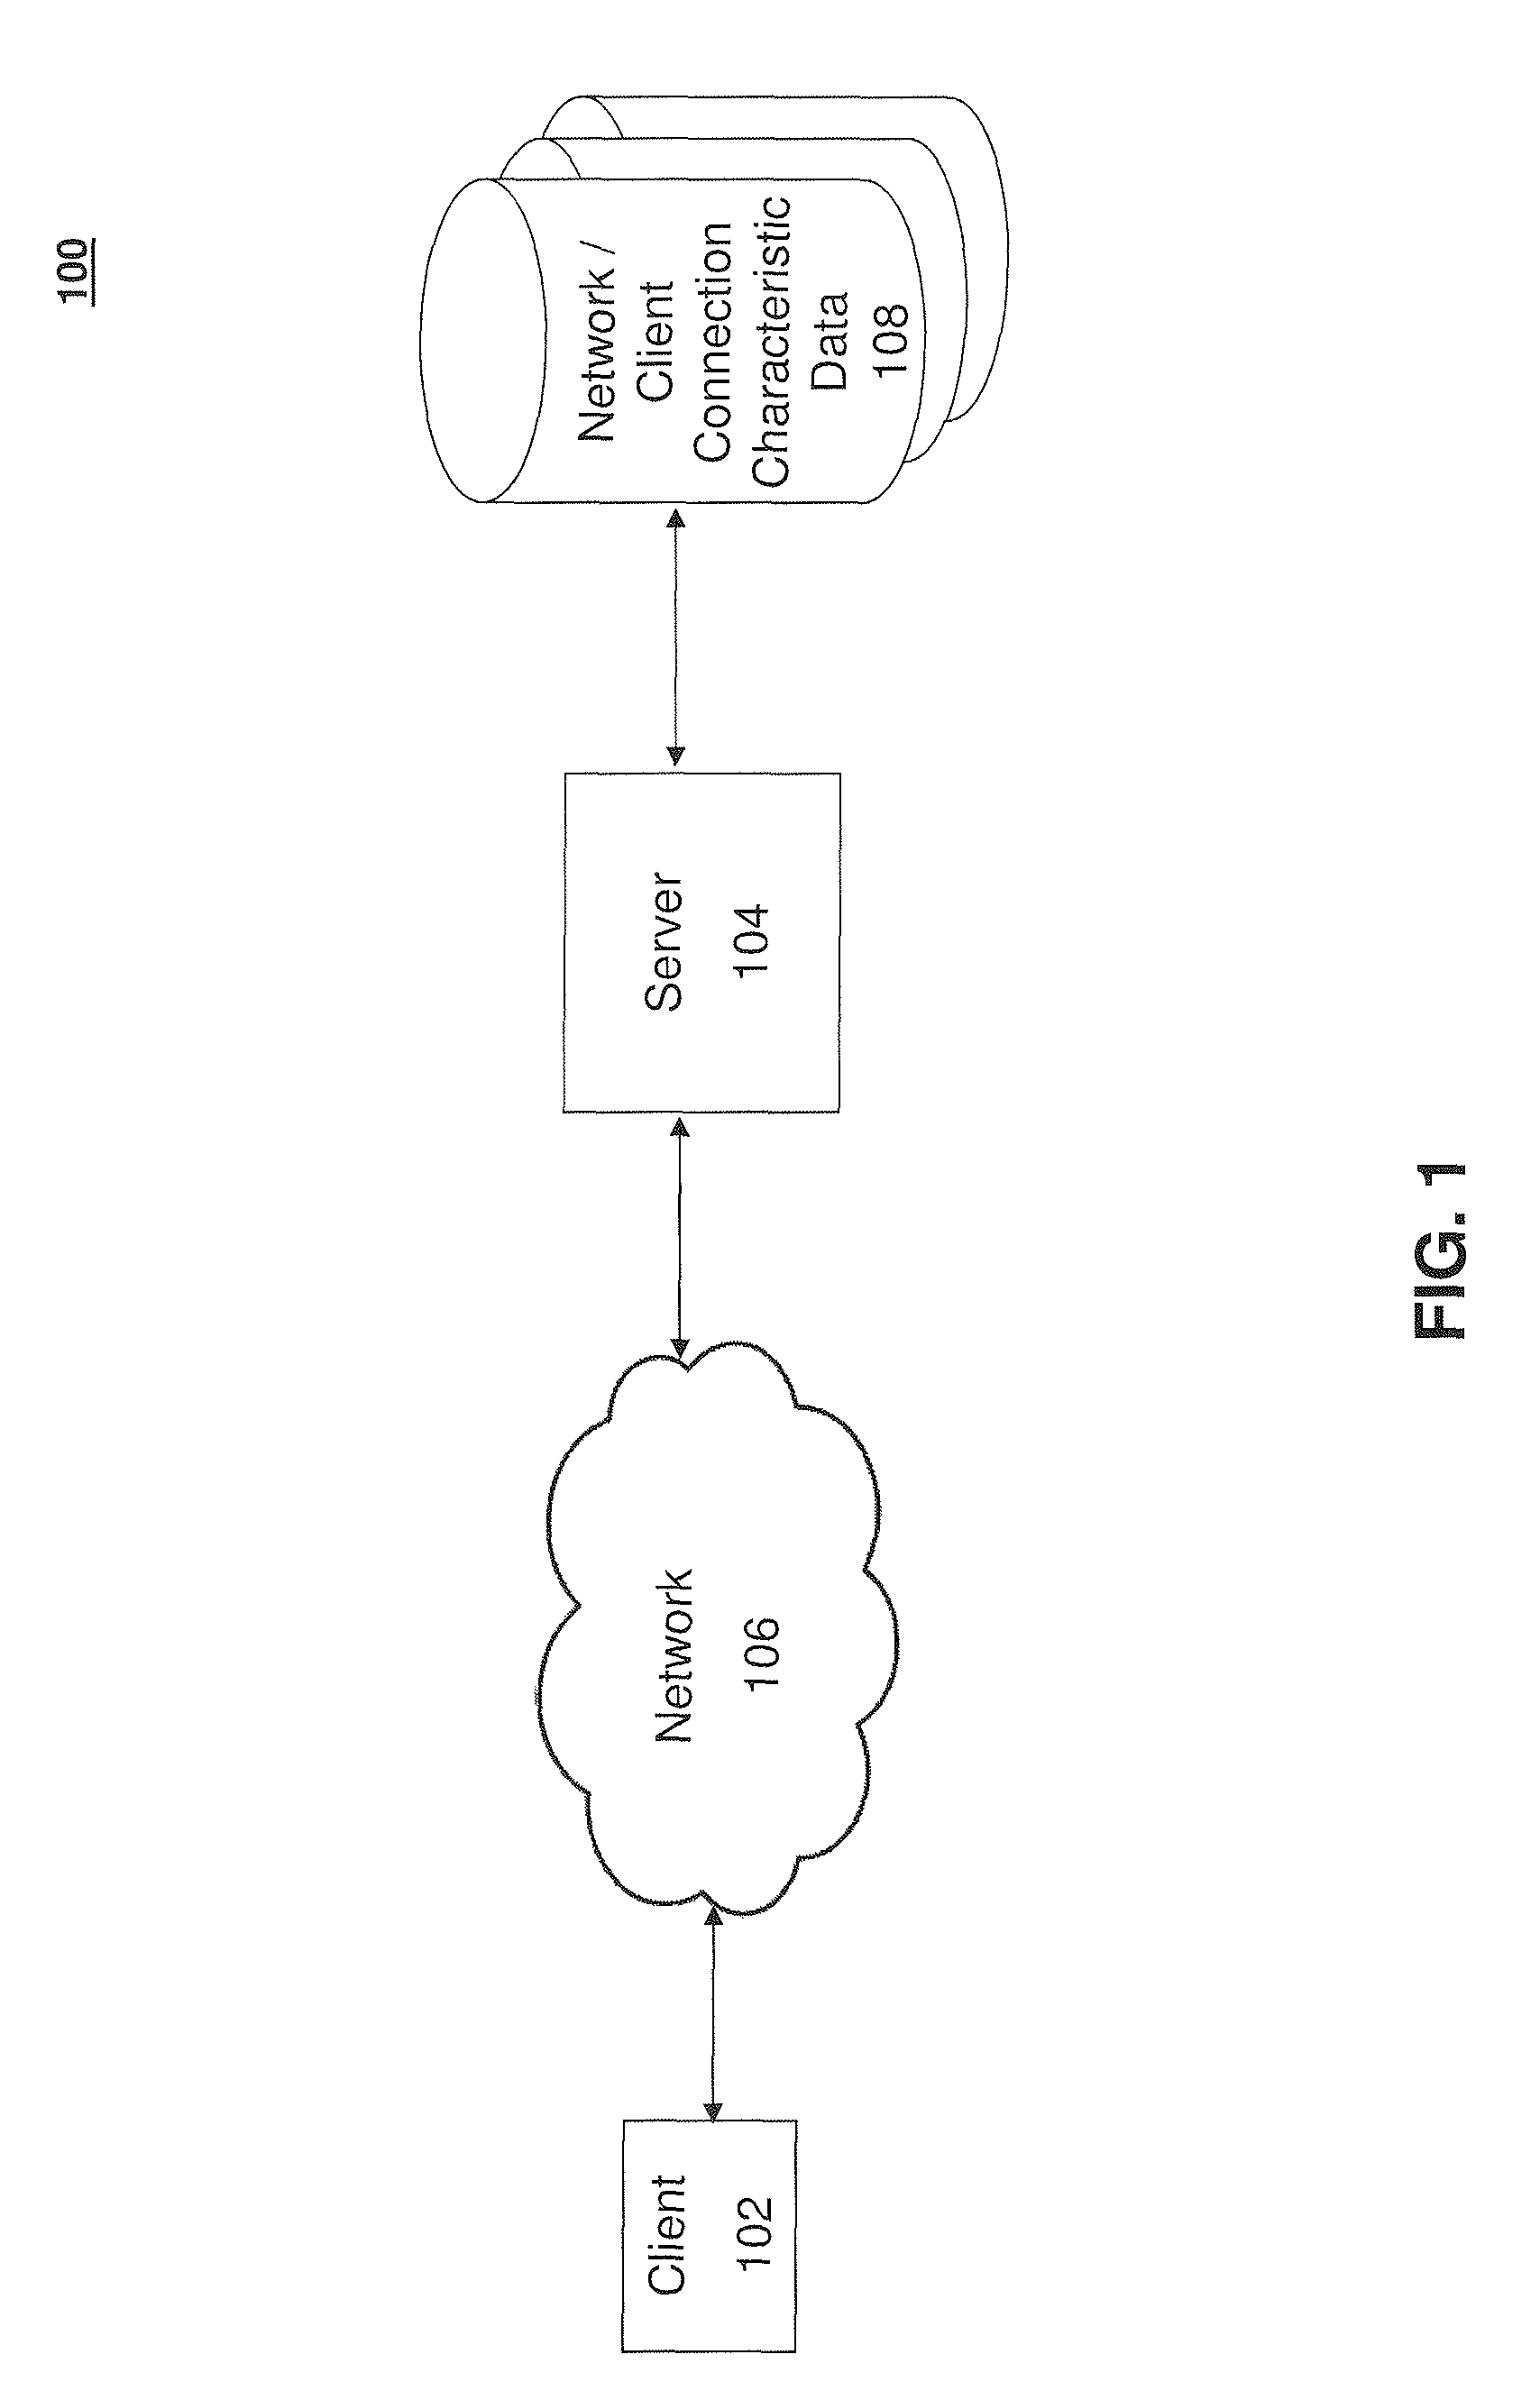 Retransmission systems and methods in reliable streaming protocols using connection characteristics